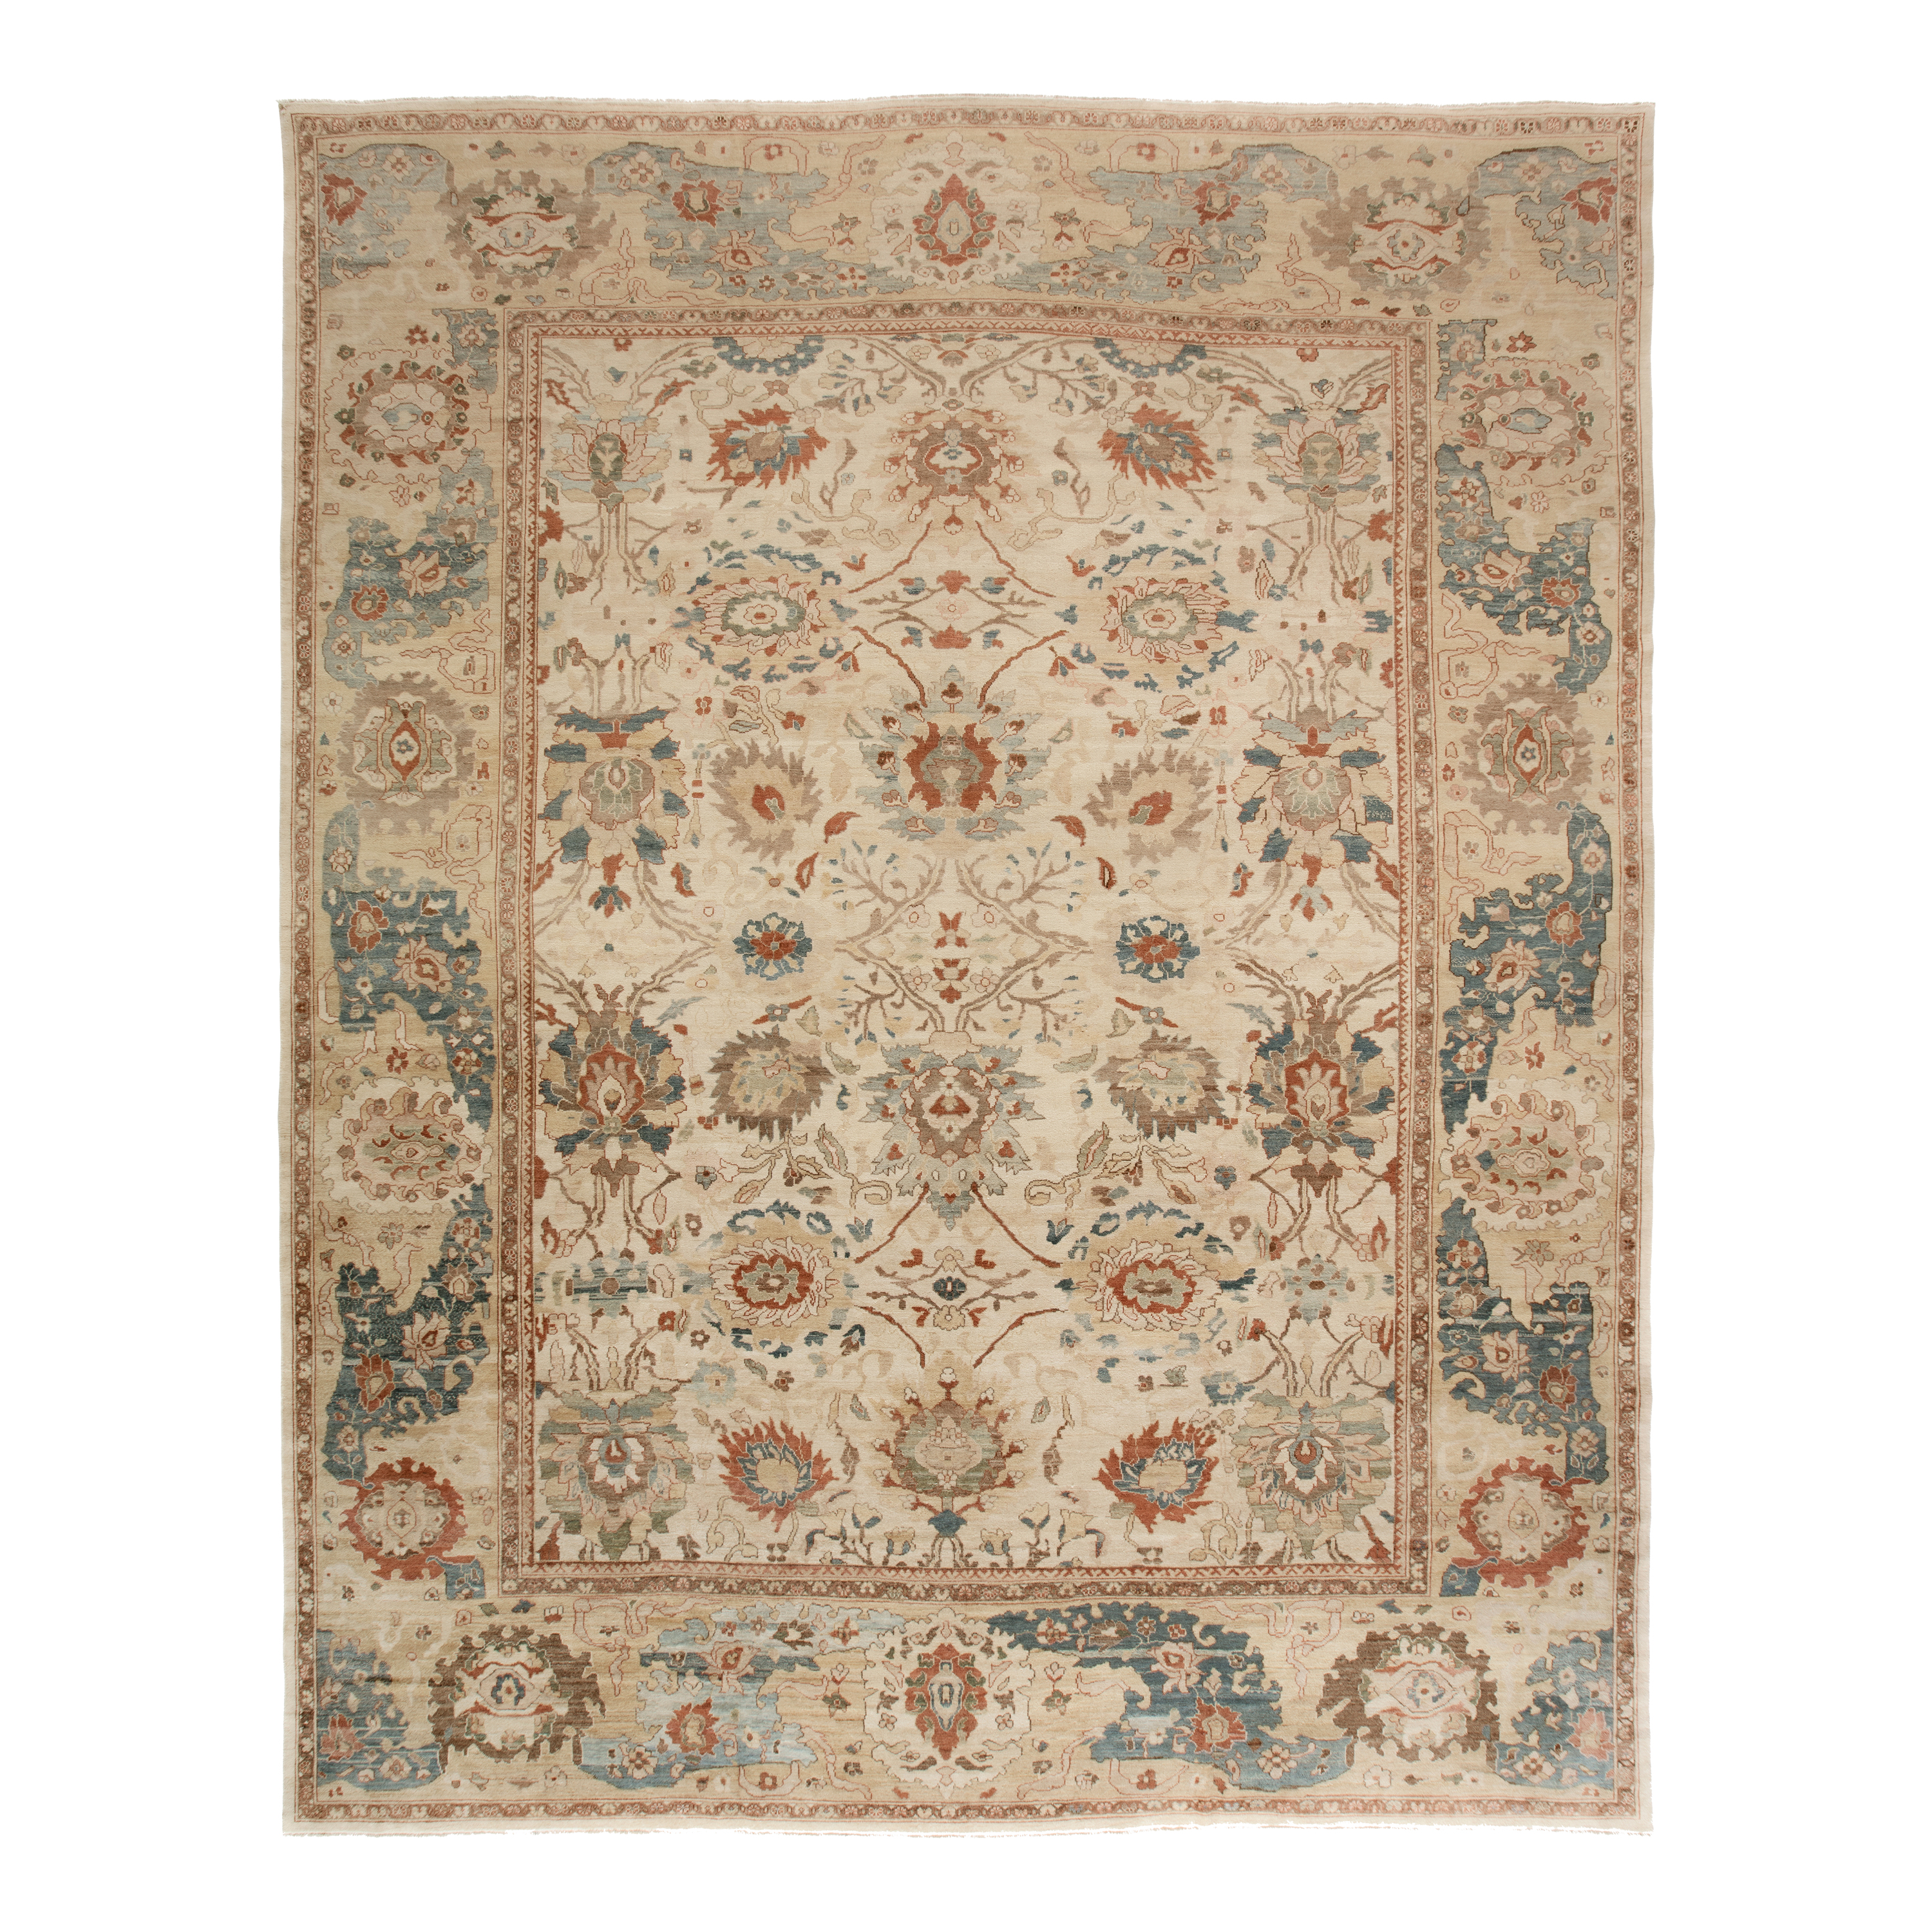 This Ziegler Sultanabad rug made by fiber procurement, hand weaving, and the use of organic dyes.